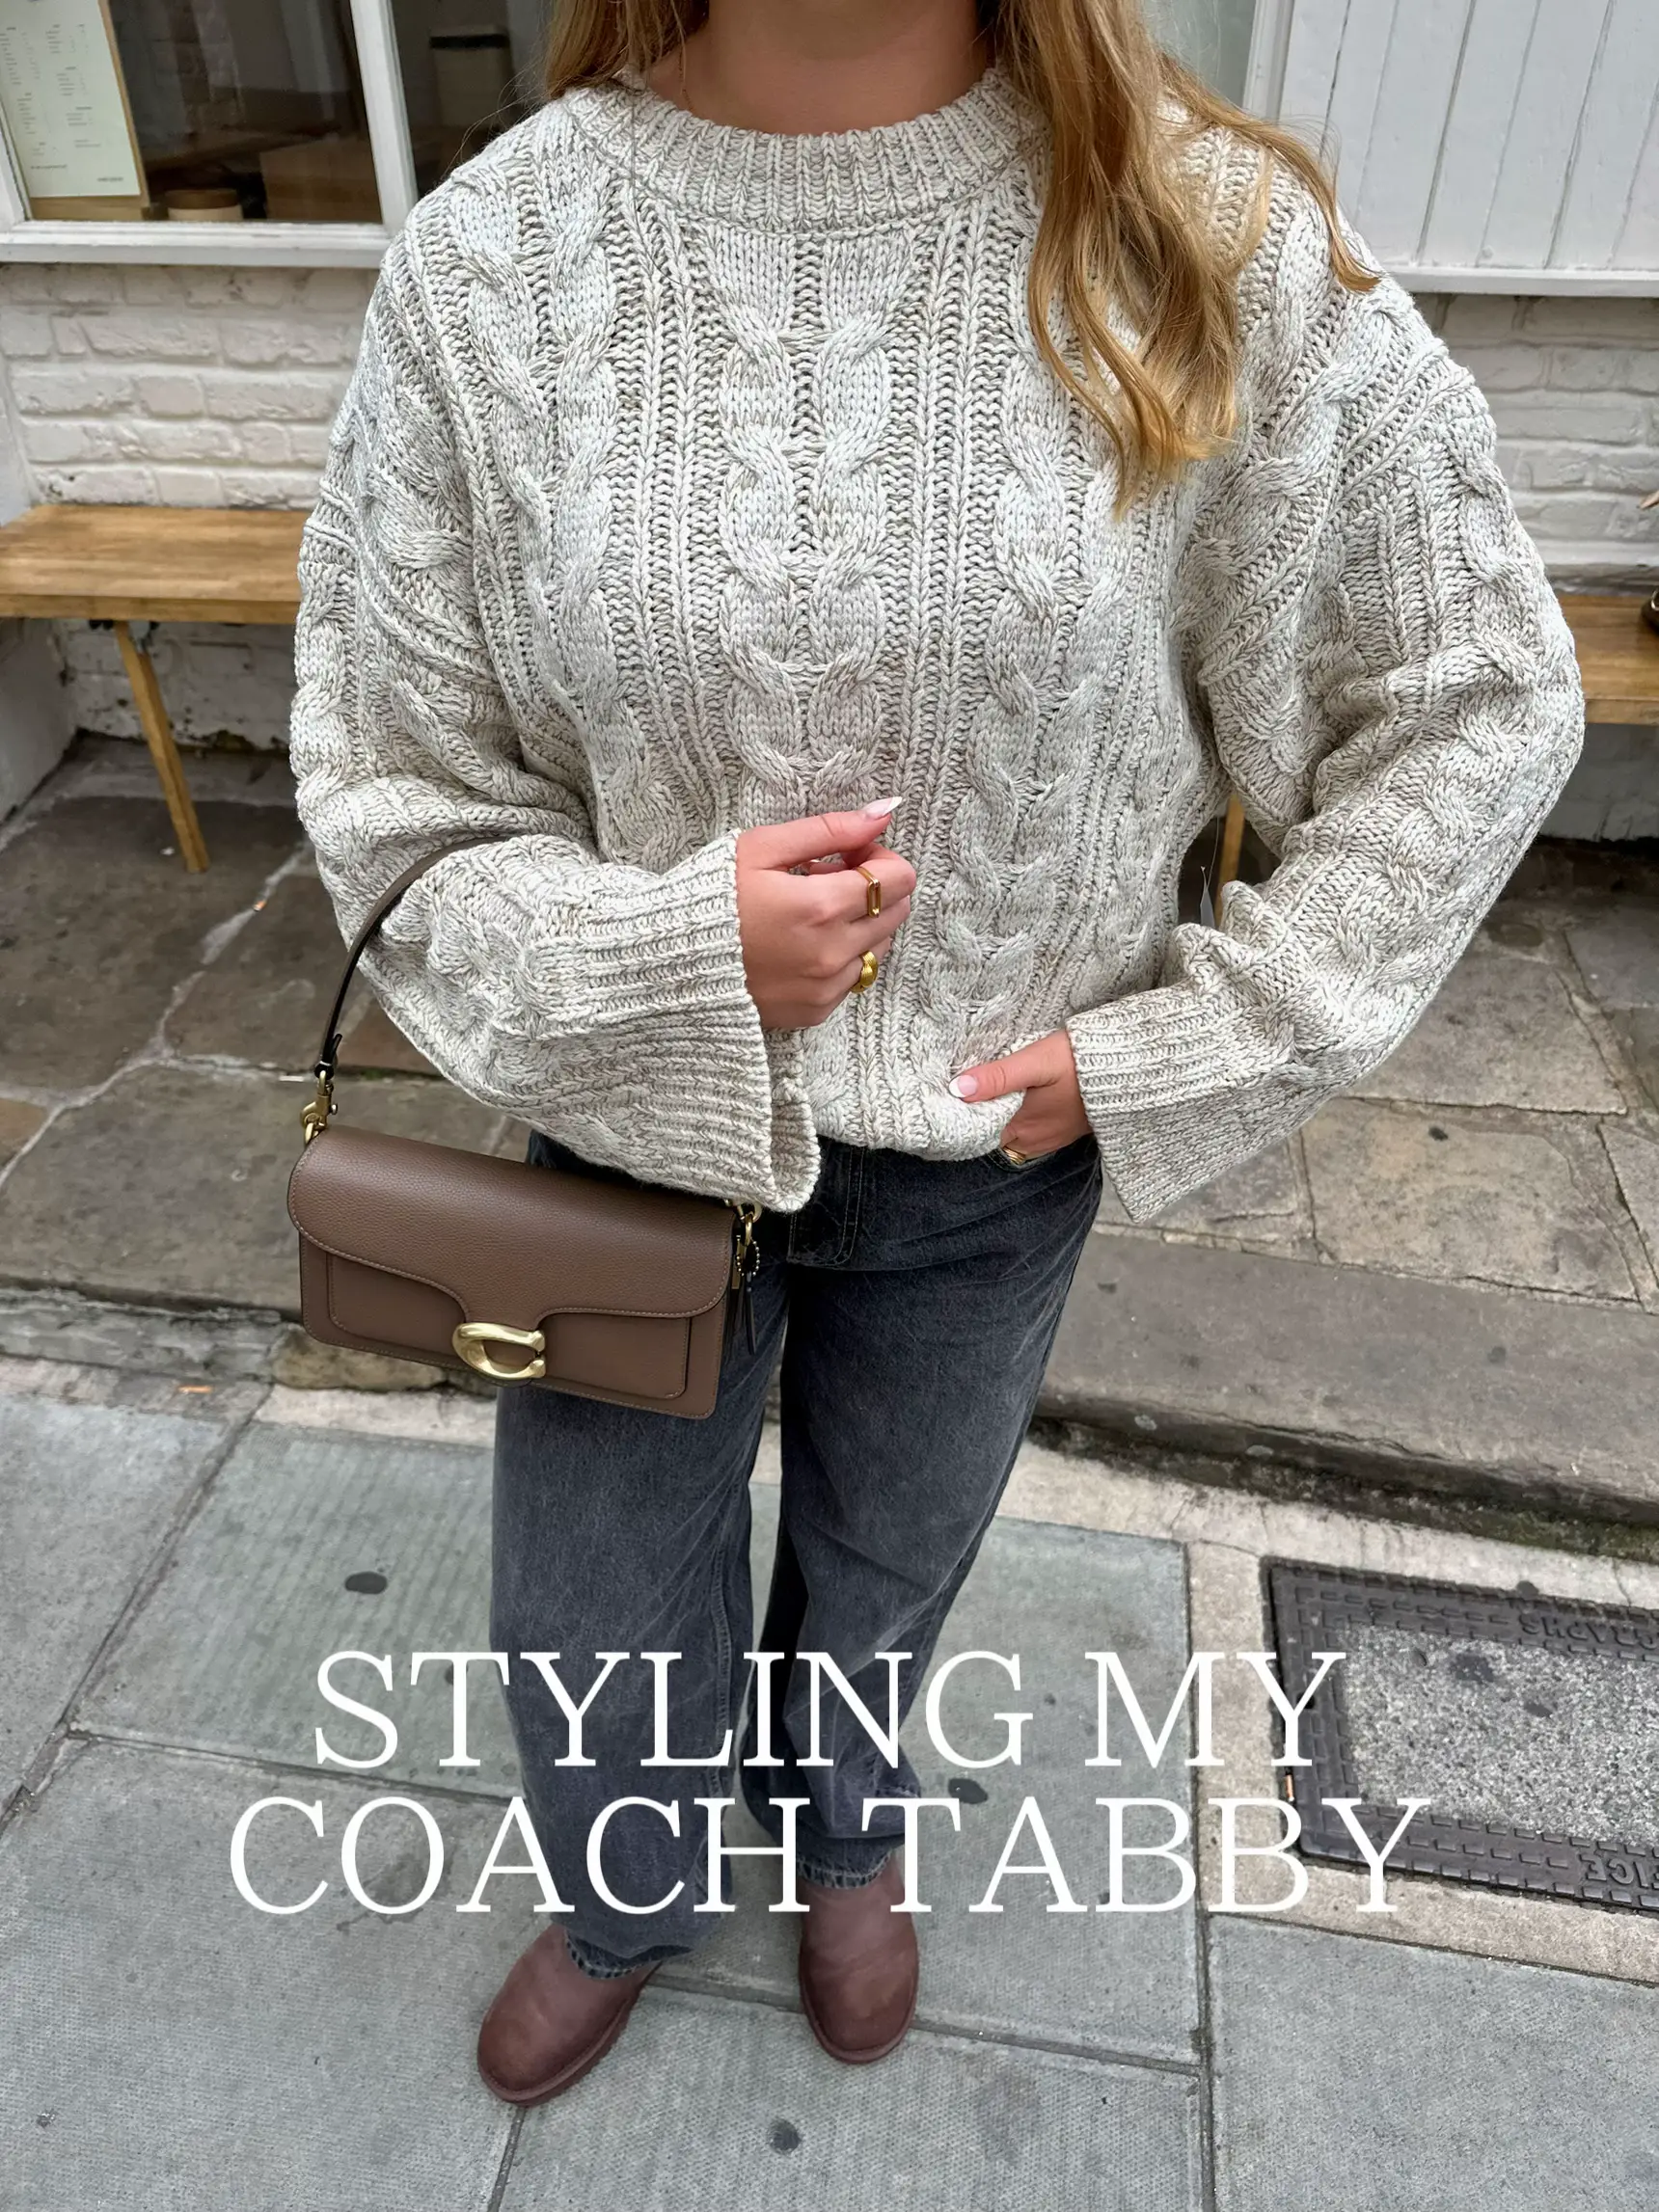 Coach Tabby 26 ✨, Gallery posted by Lorizel Maningo